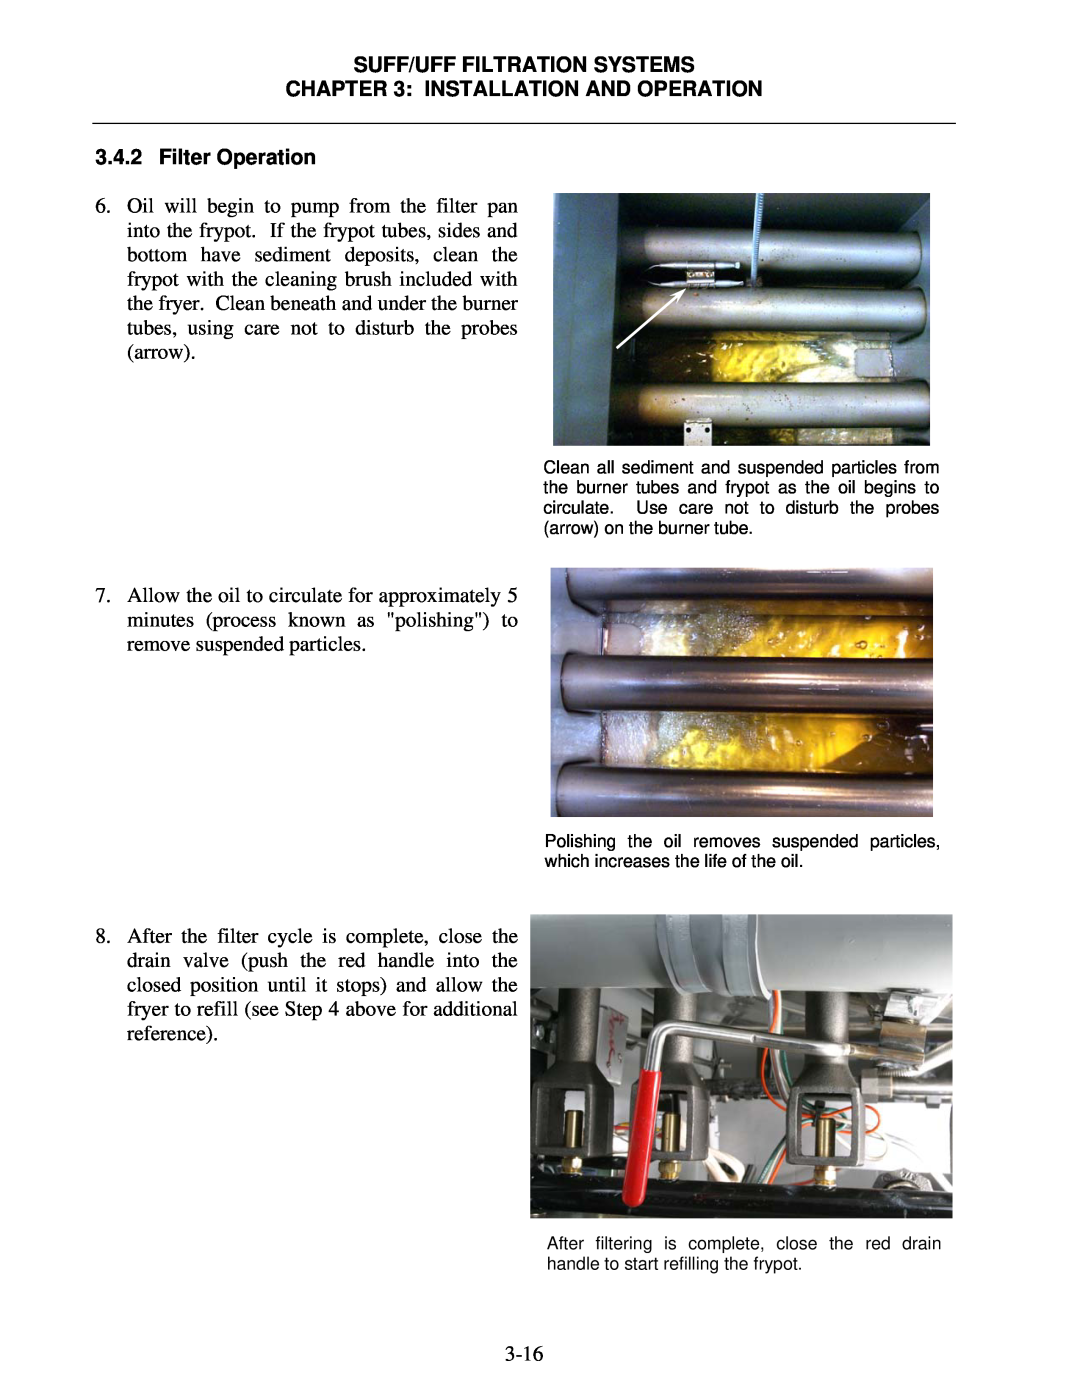 Frymaster Under Fryer Filter (UFF) Filter Operation, Suff/Uff Filtration Systems, Installation And Operation 